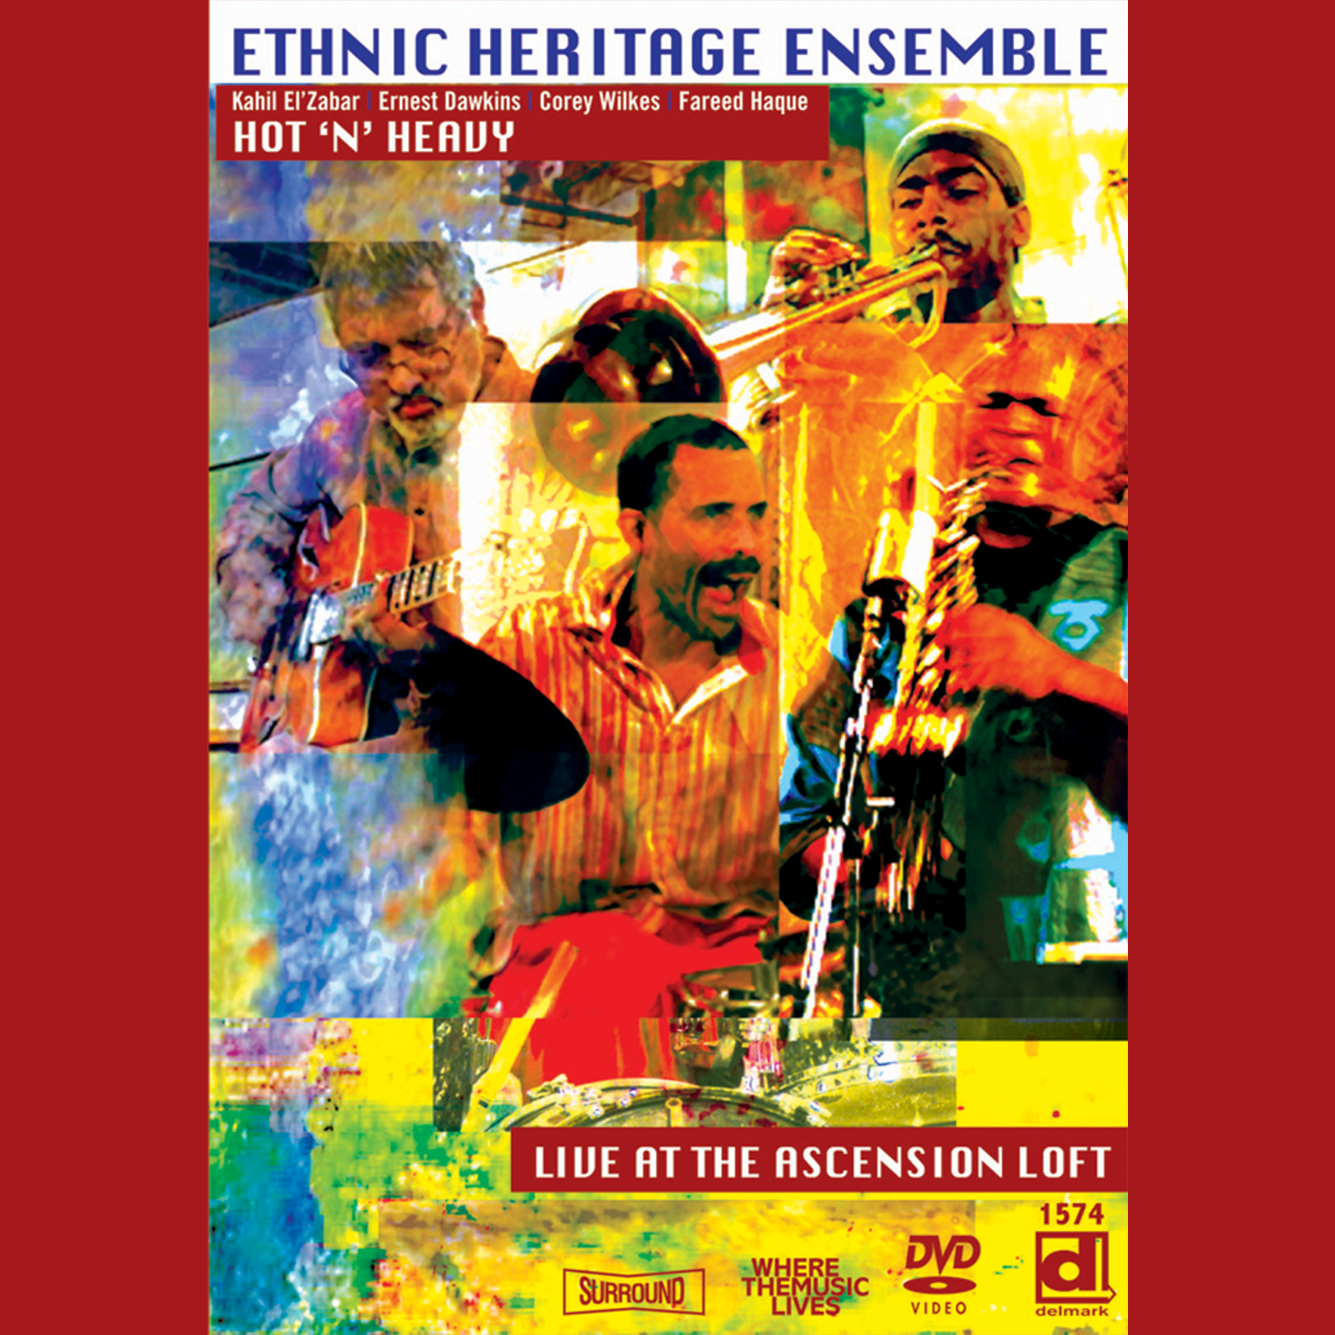 DVD: Ethnic Heritage Ensemble – Hot 'N' Heavy: Live At The 